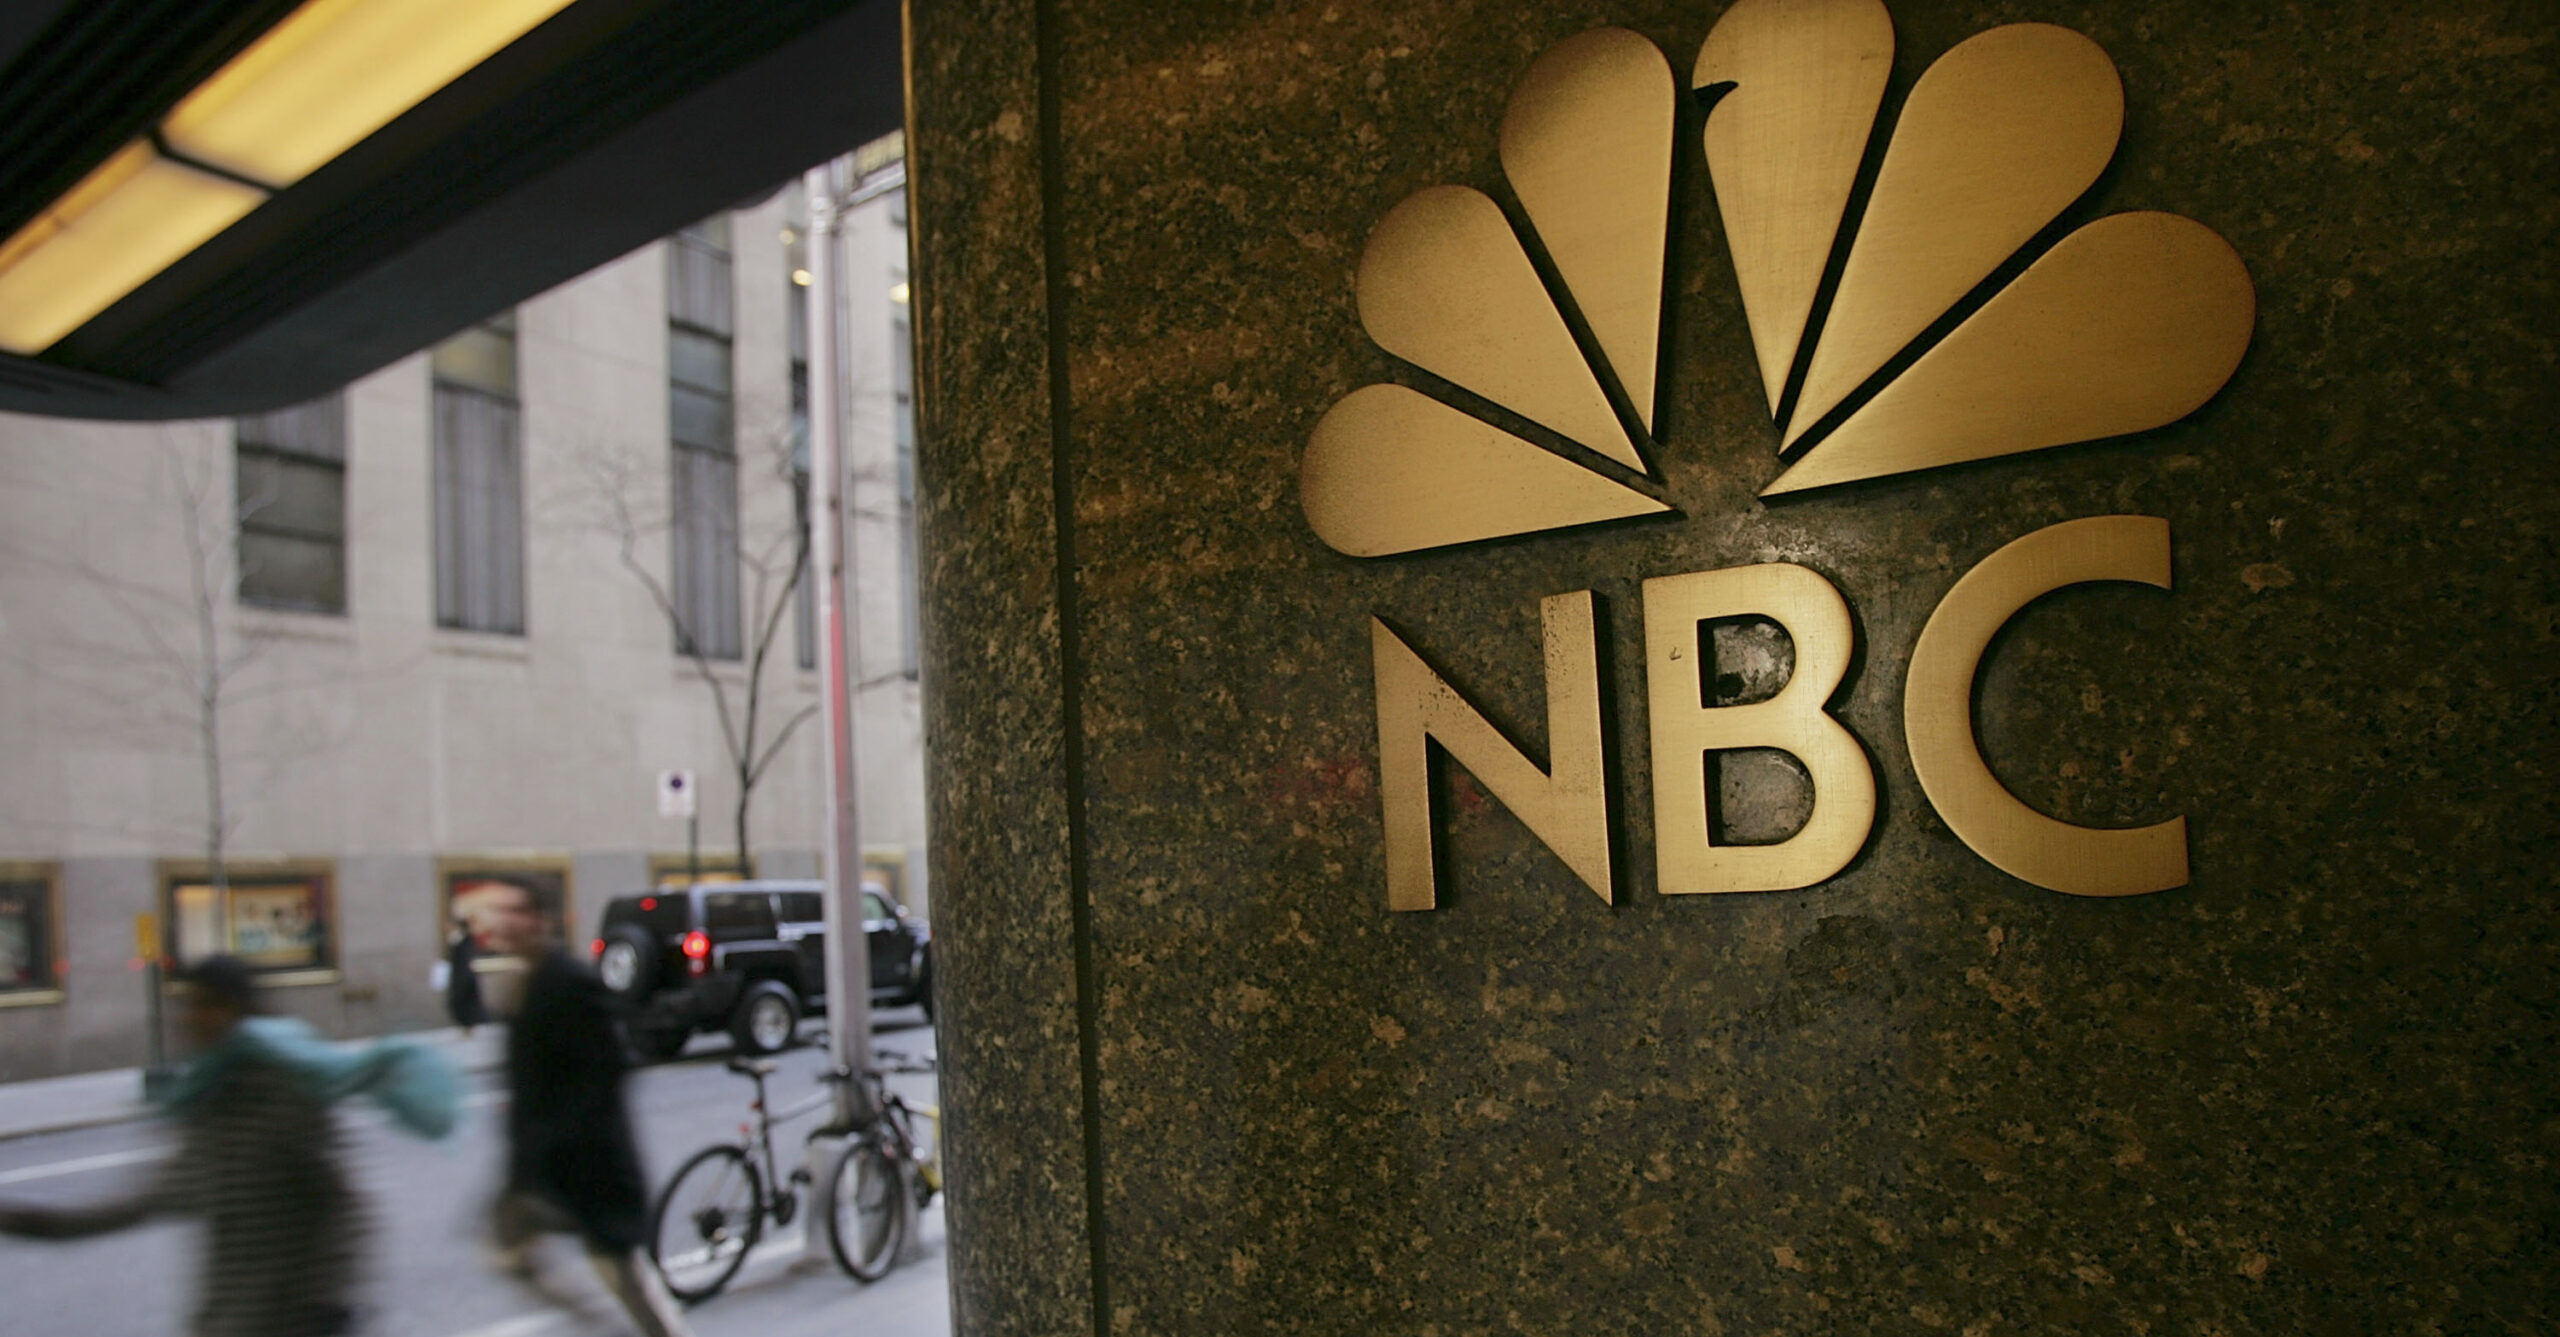 NBC Considers Cutting Off Prime Time Programming After 10 P.M. in the Wake of Committing Billions to College, NFL Football (mediaite.com)